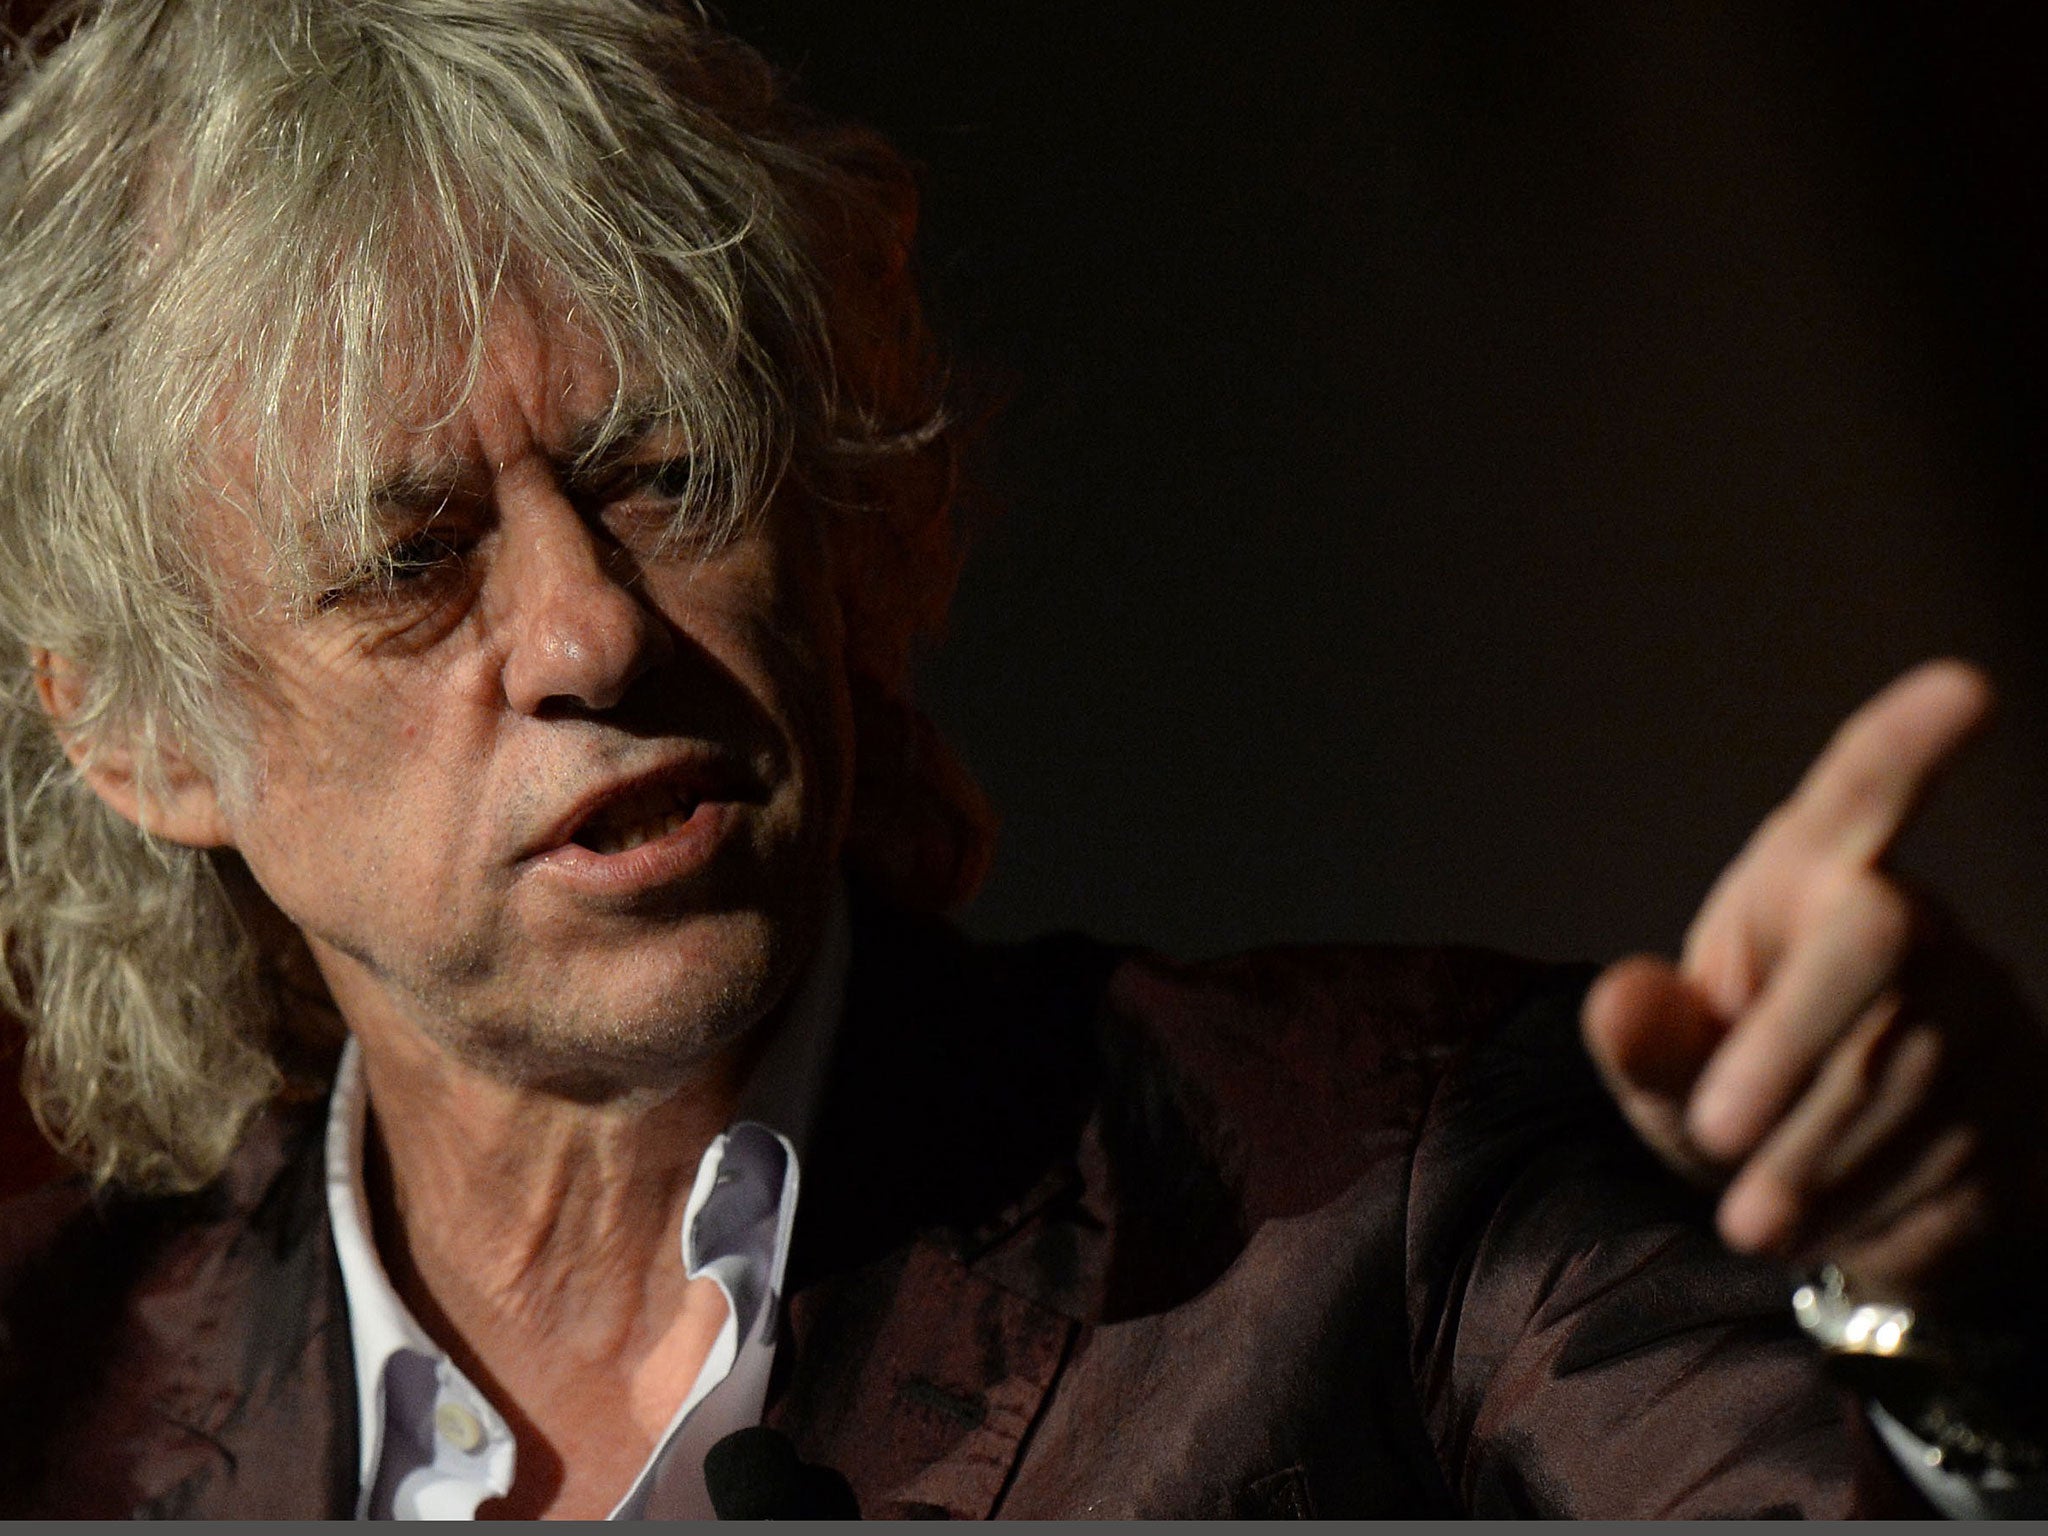 The veteran poverty campaigner Sir Bob Geldof issues a stark challenge to emerging economies at the Melbourne HIV/Aids conference